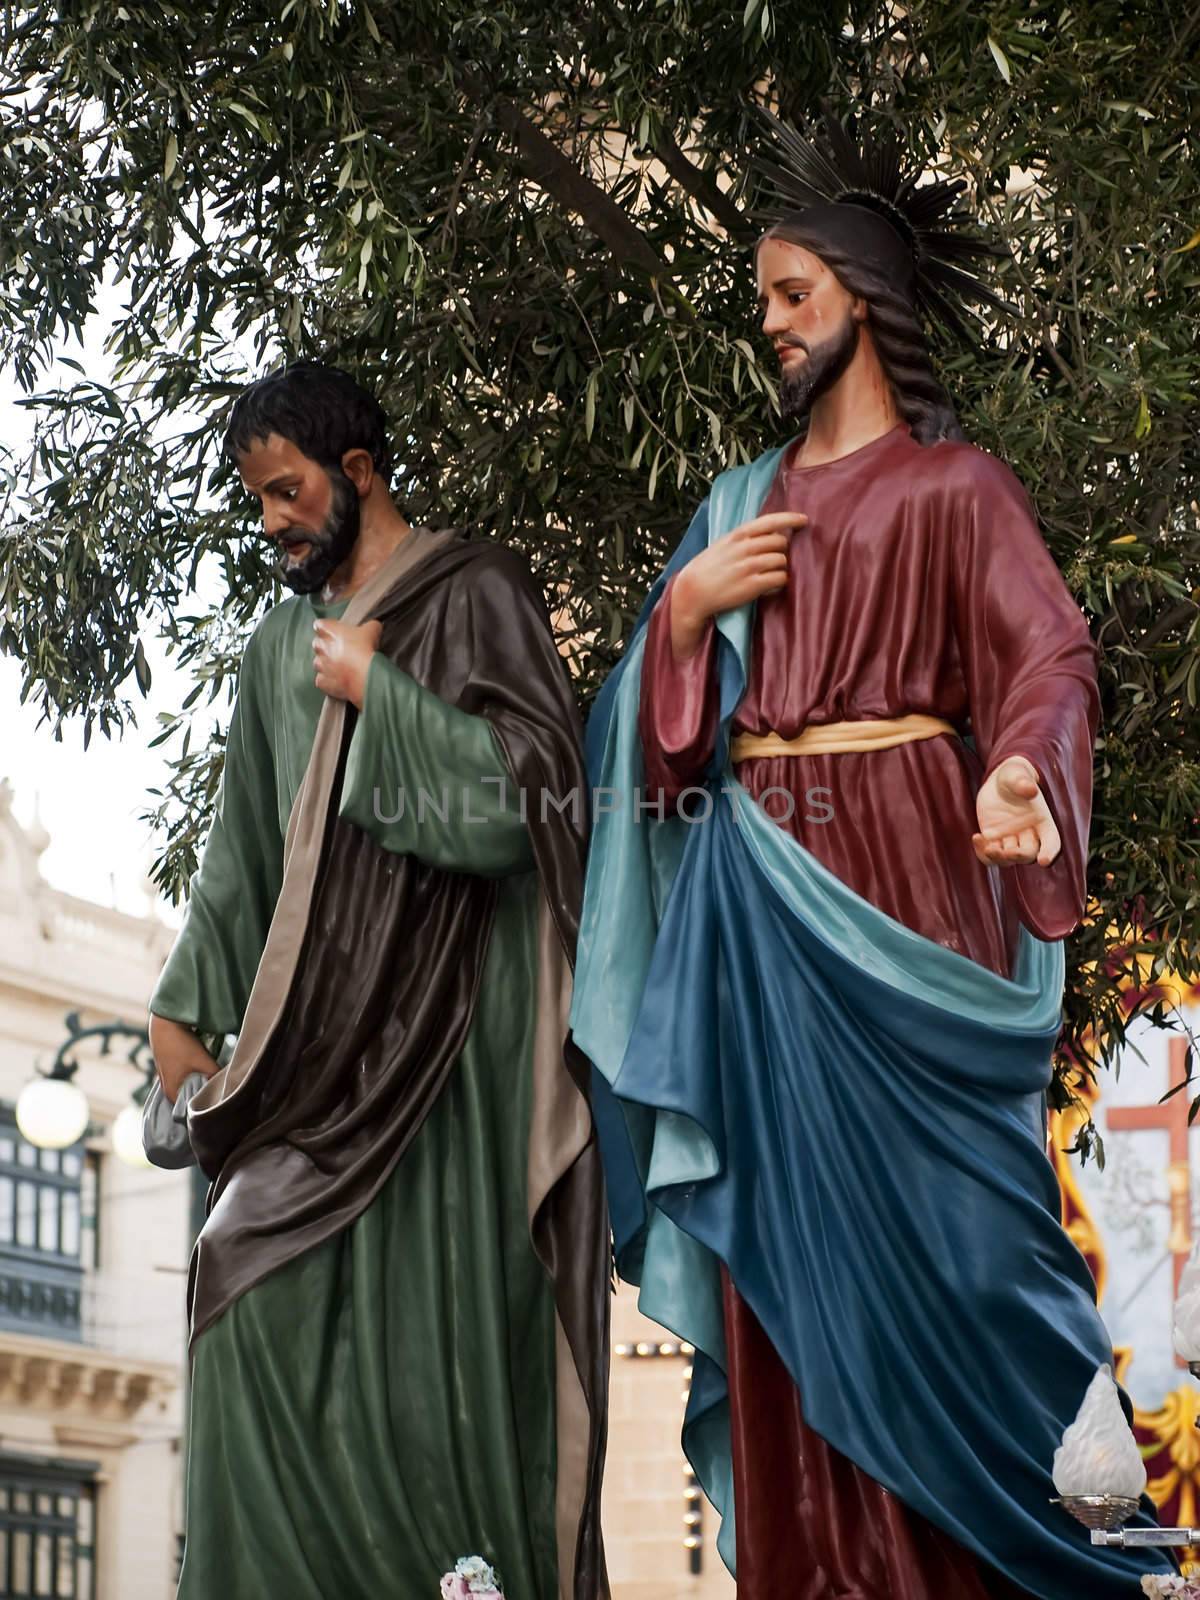 Statue of the Christ by PhotoWorks